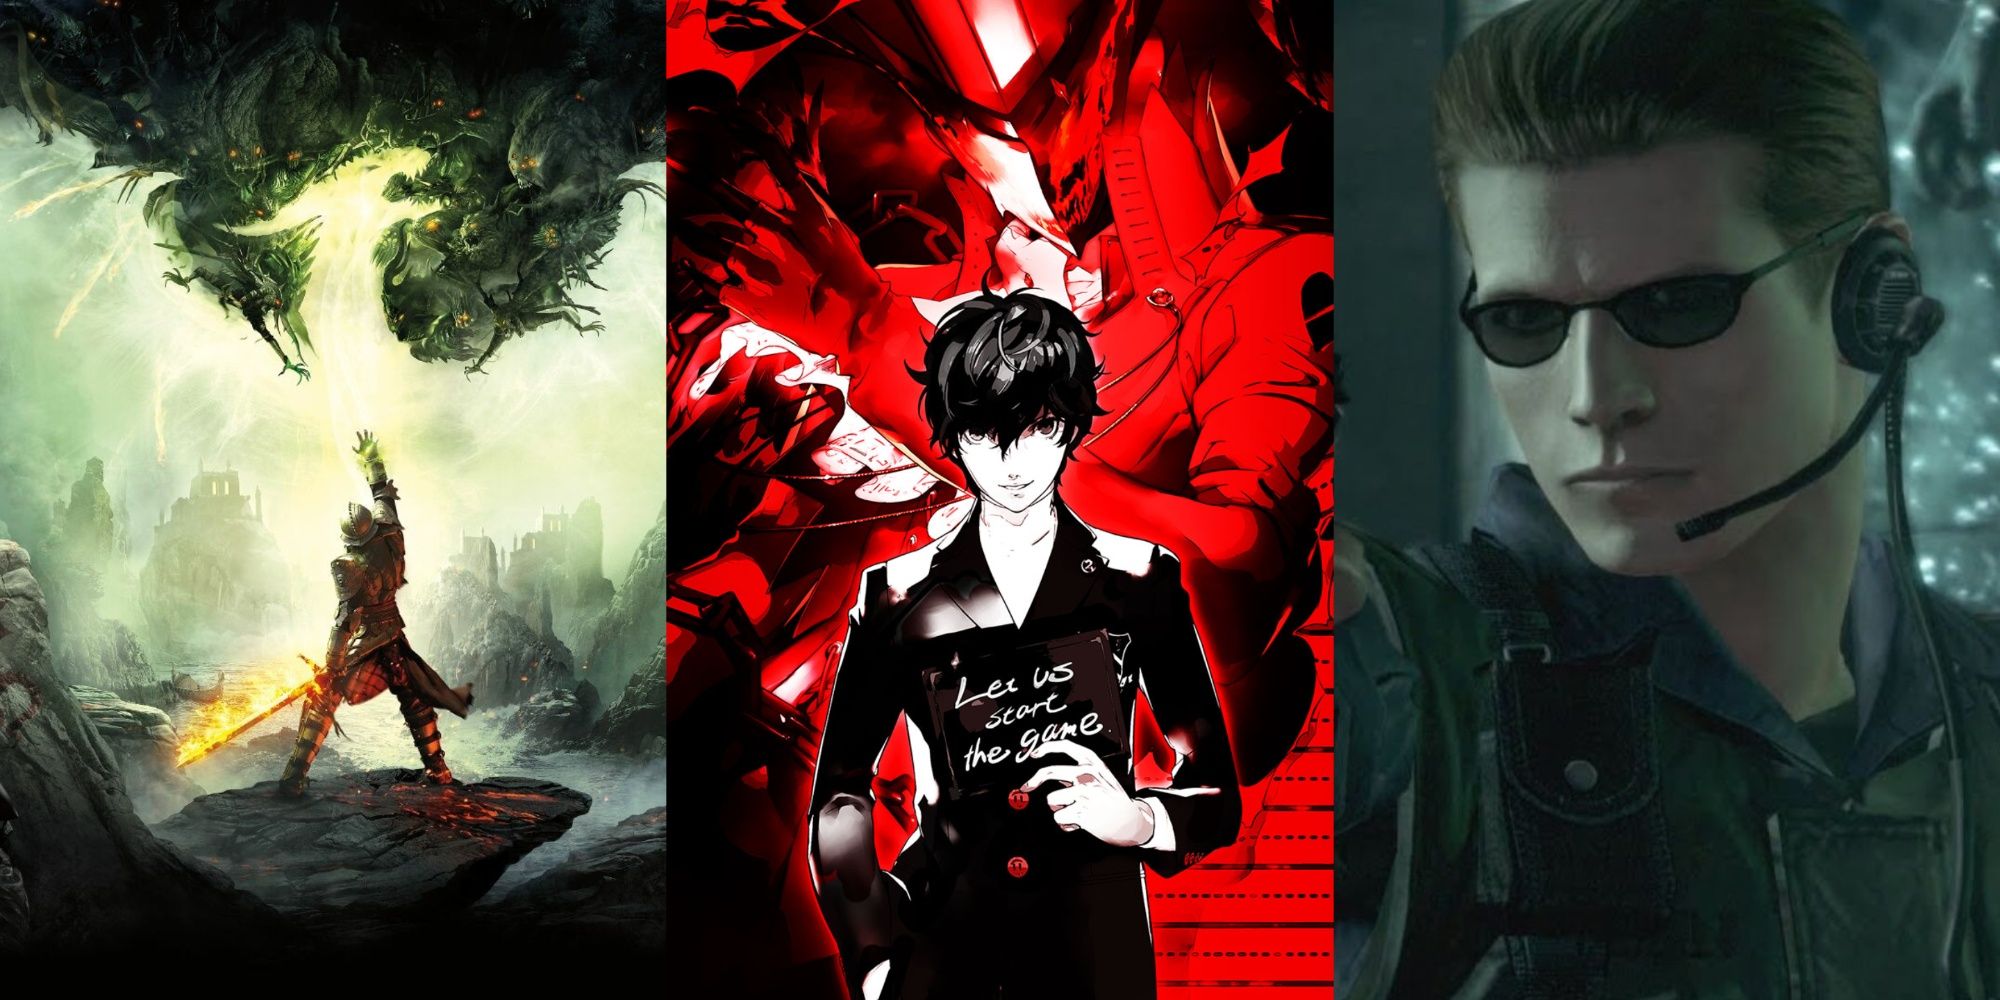 Dragon Age Inquisition, Persona 5 and Albert Wesker from Resident Evil